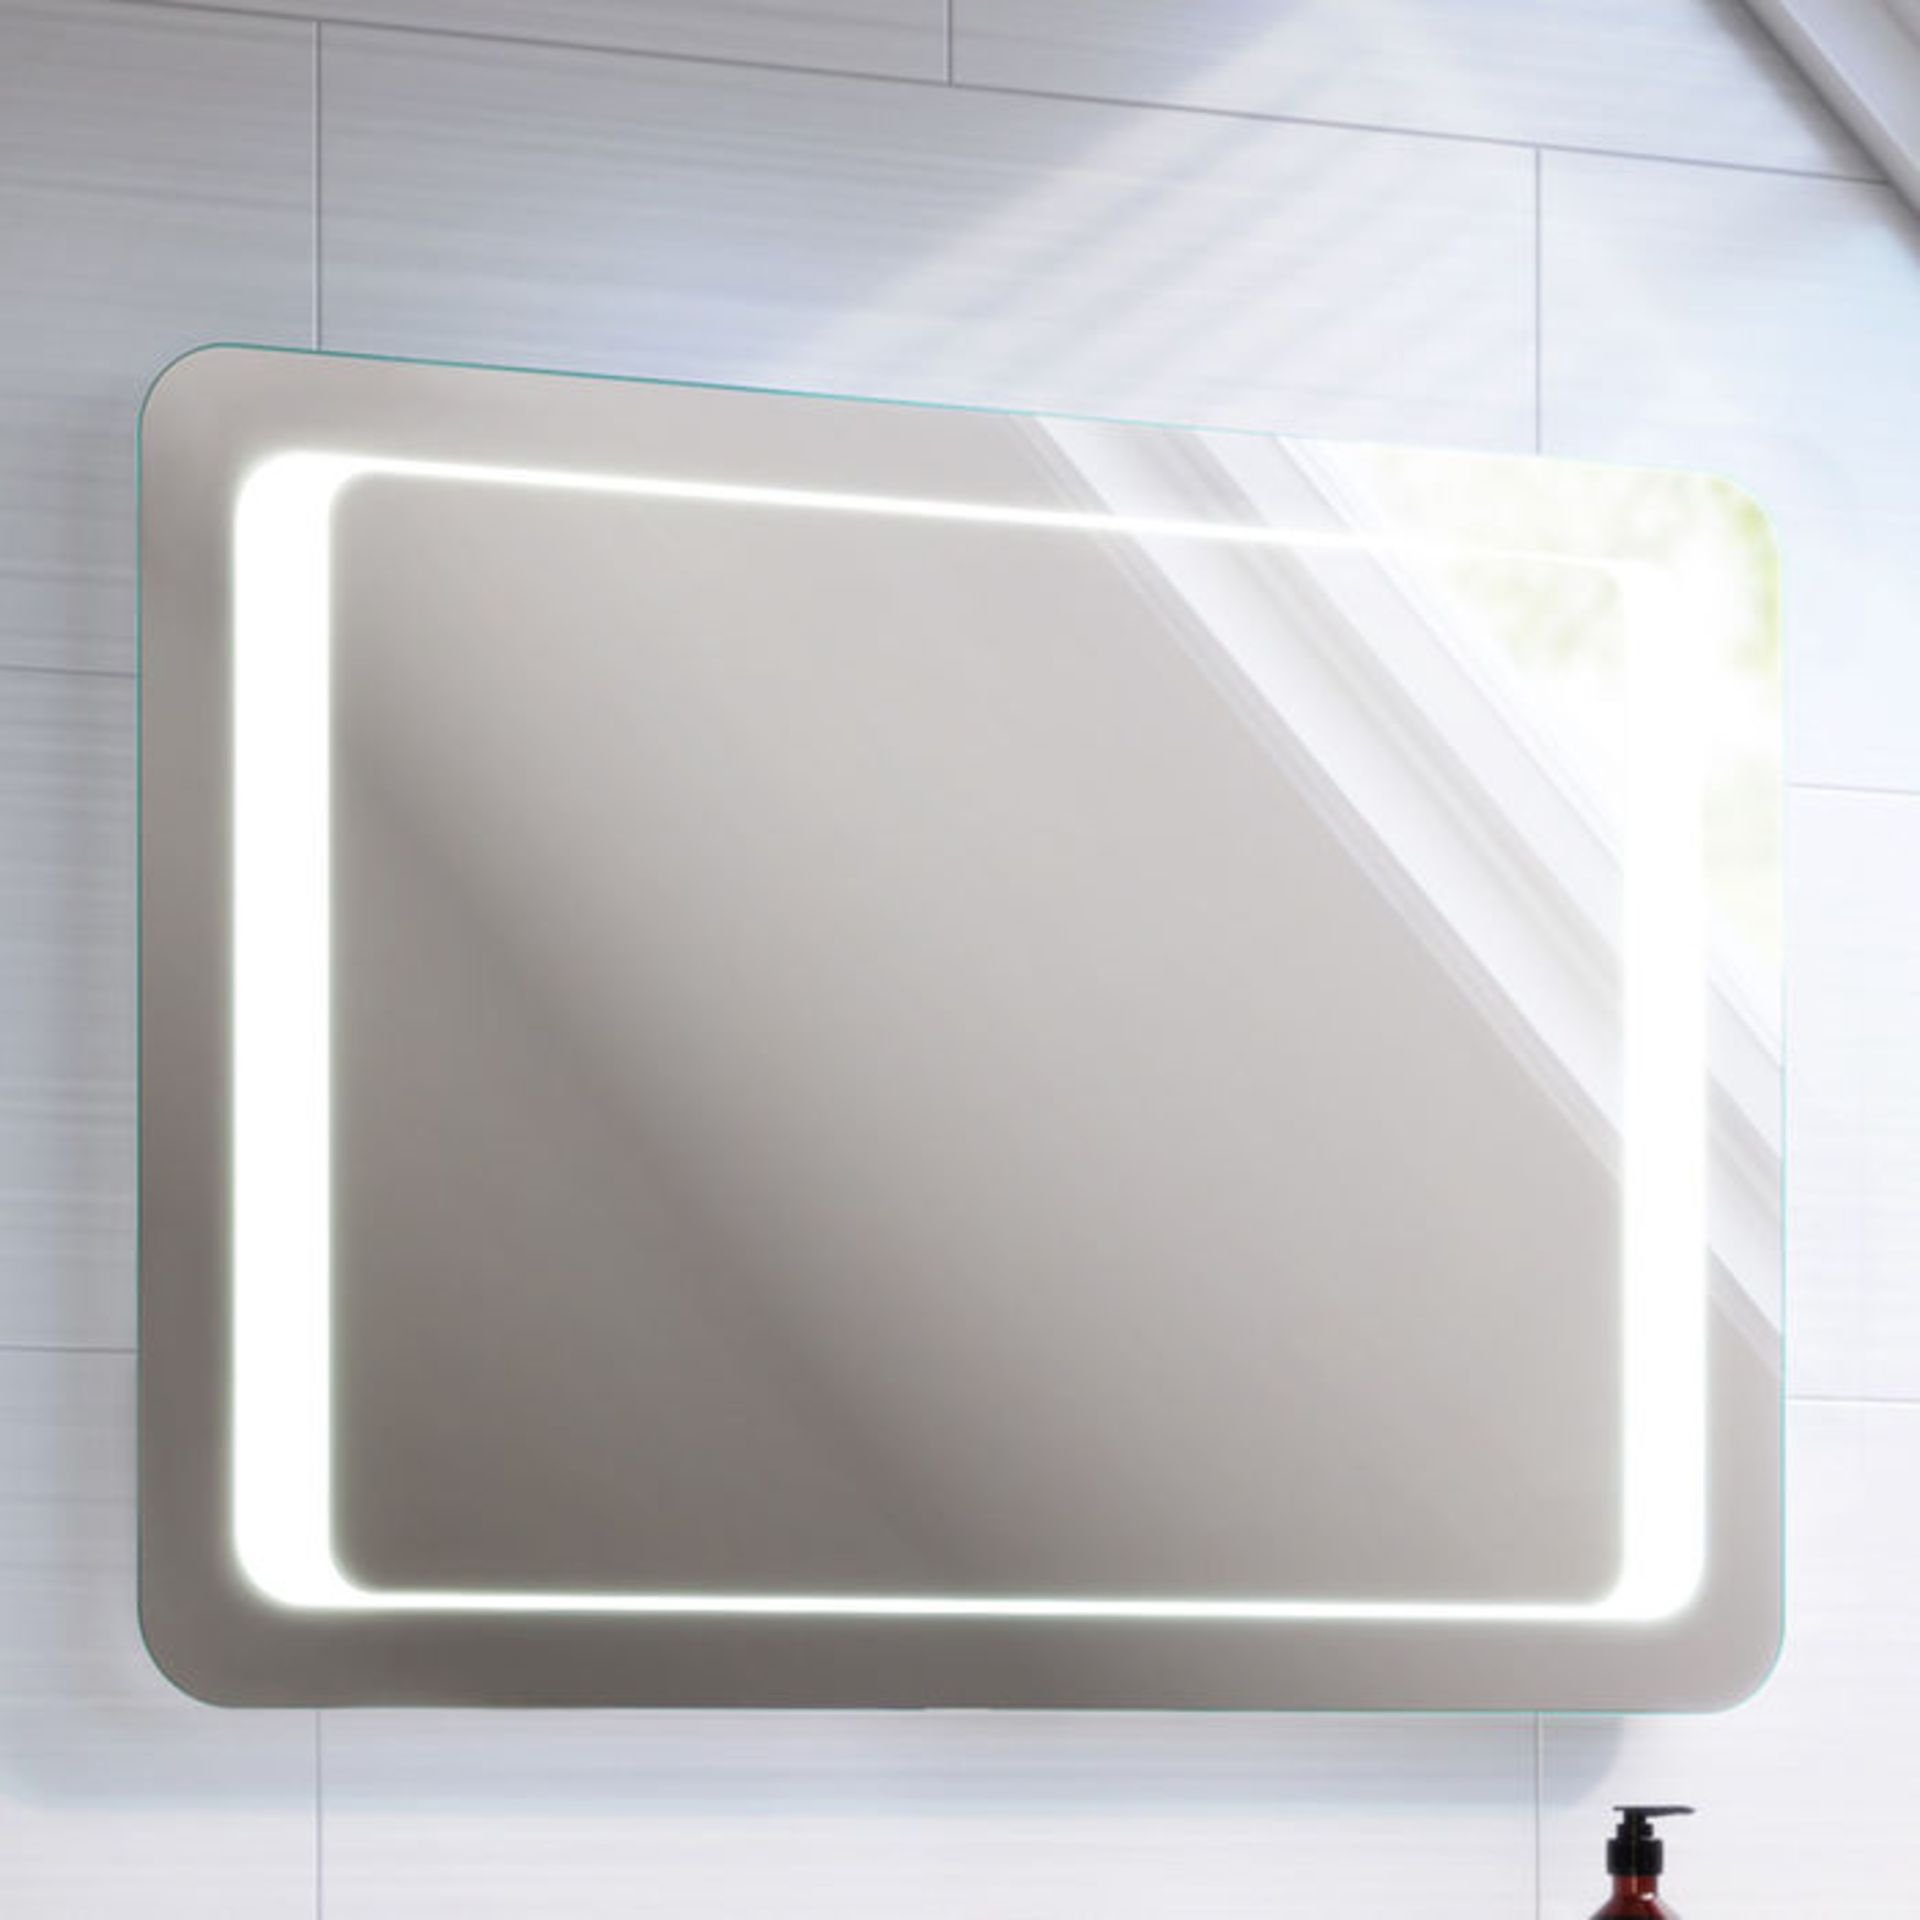 (GR114) 800x600mm Quasar Illuminated LED Mirror RRP £349.99. Energy efficient LED lighting with IP44 - Image 3 of 5